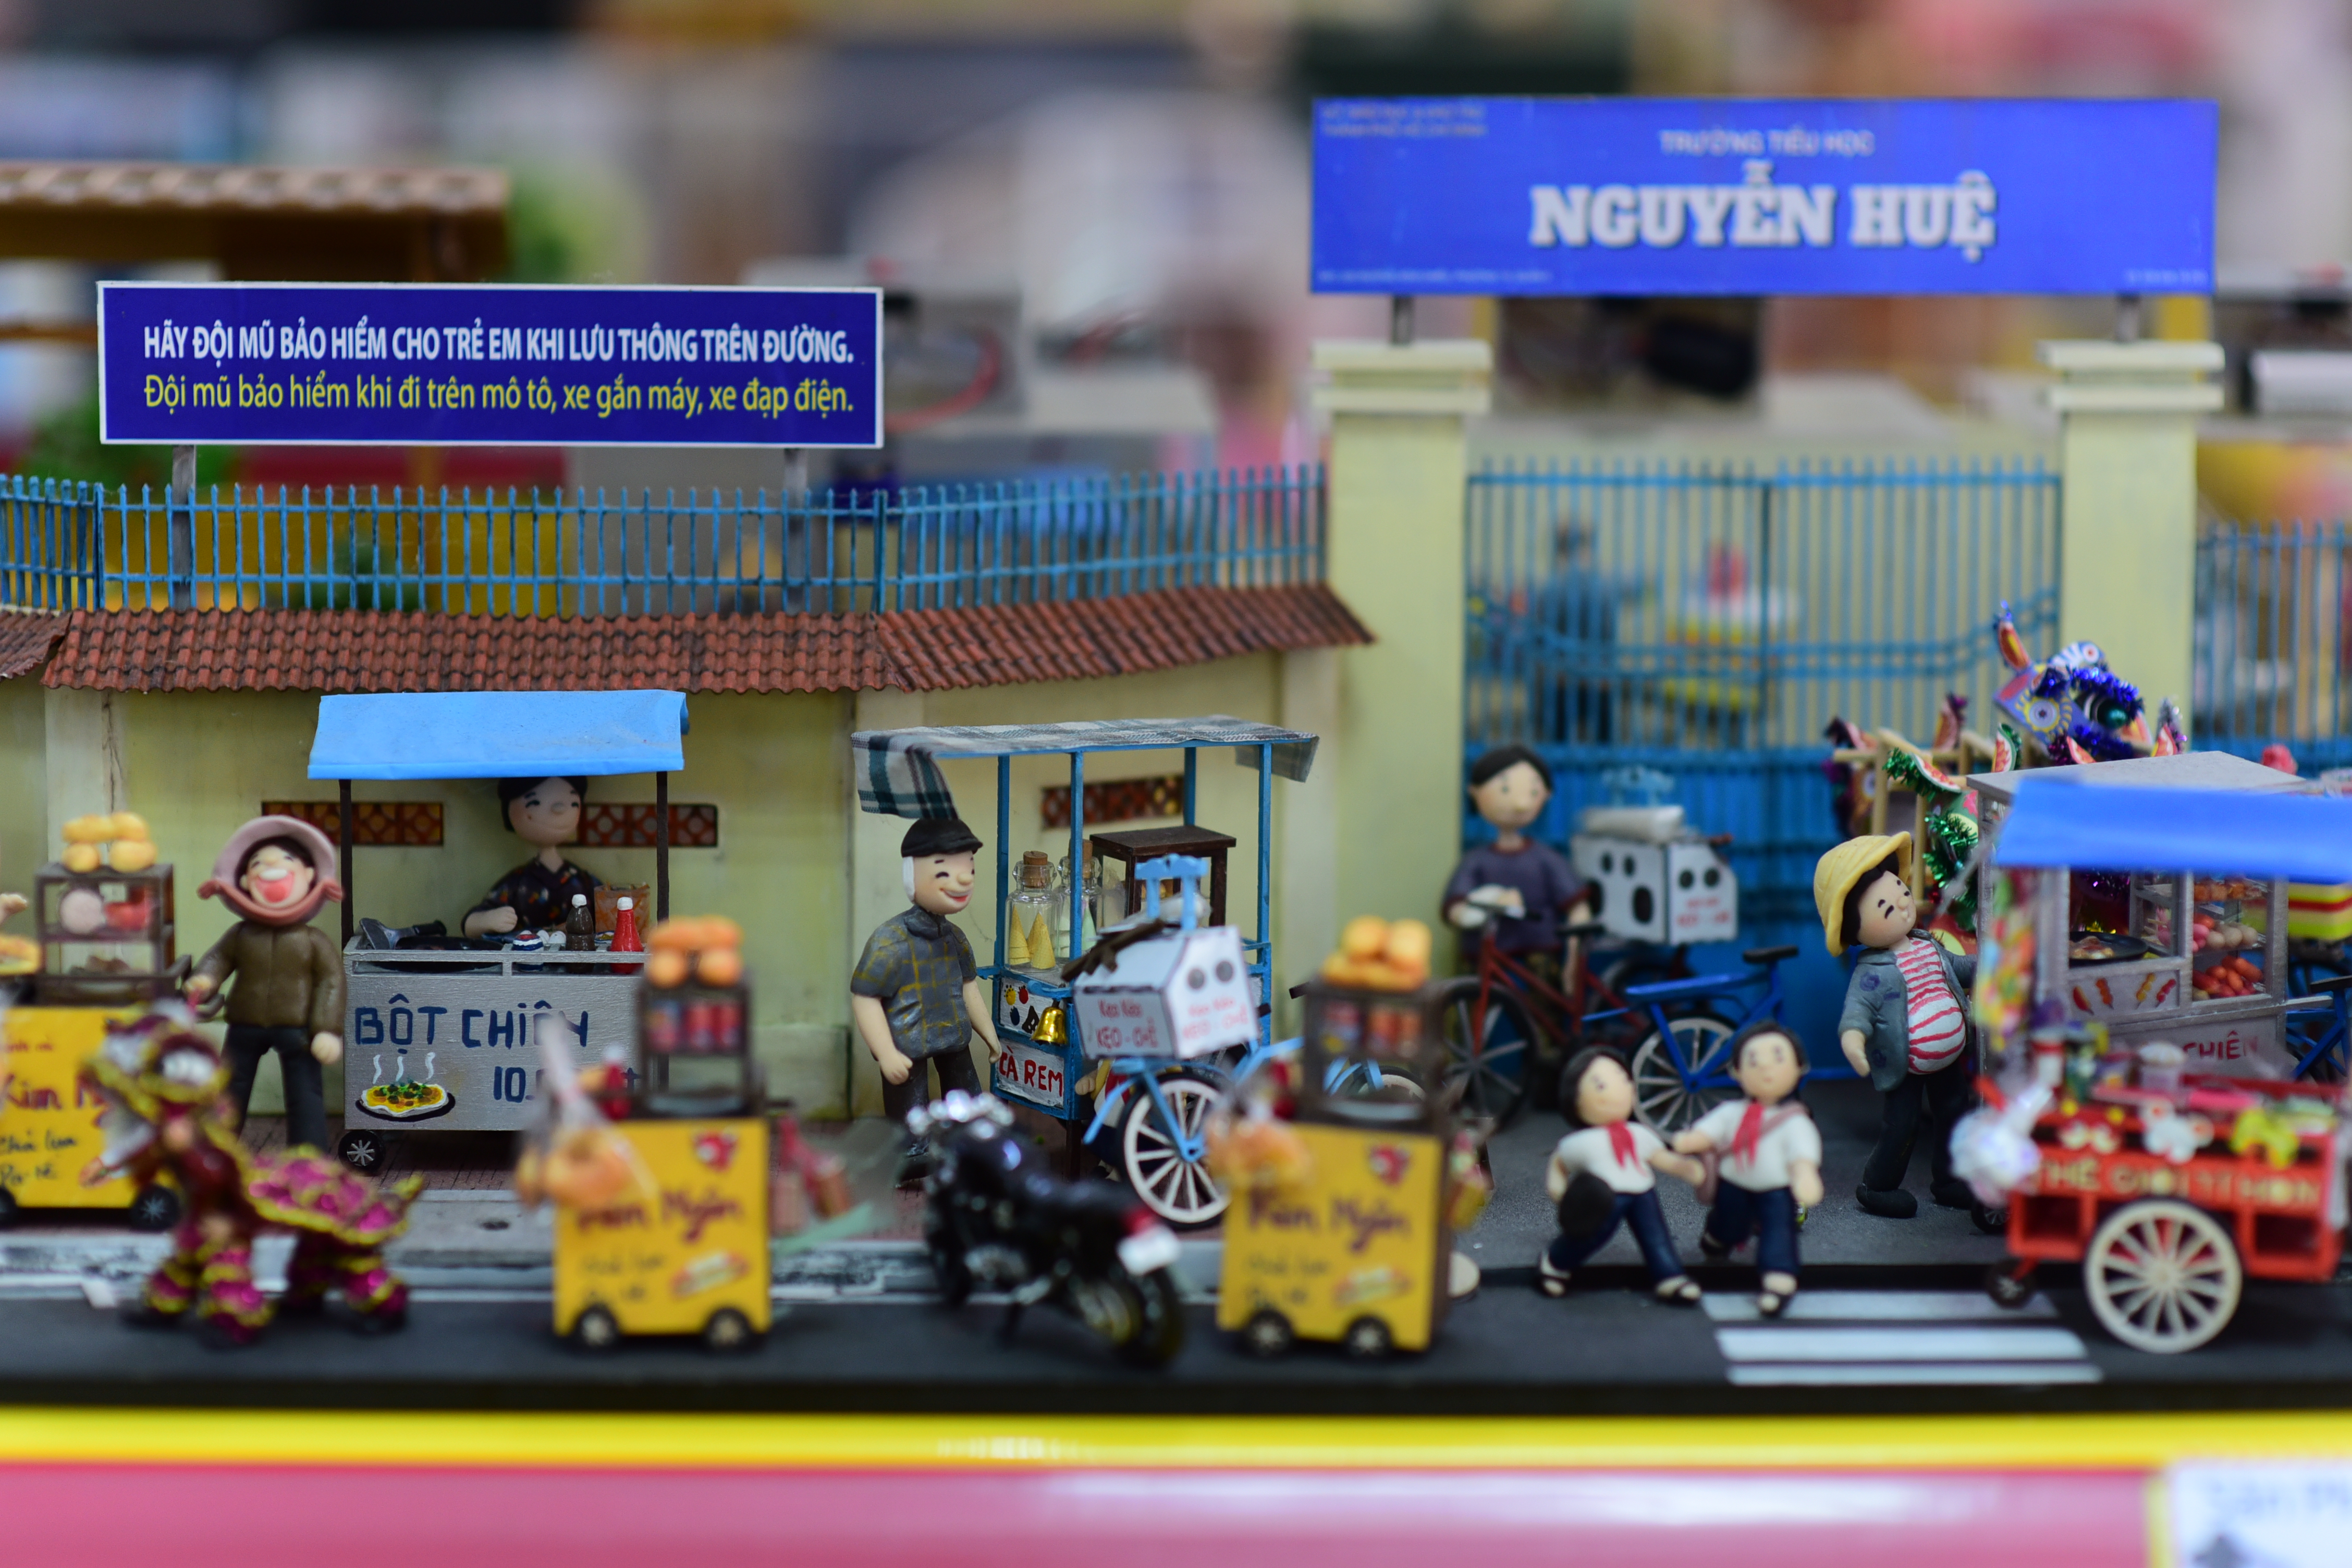 A series of miniatures imitating a school gate area with toy shops and snack carts that every young student in Ho Chi Minh City feels connected to. Photo: Quang Dinh/ Tuoi Tre